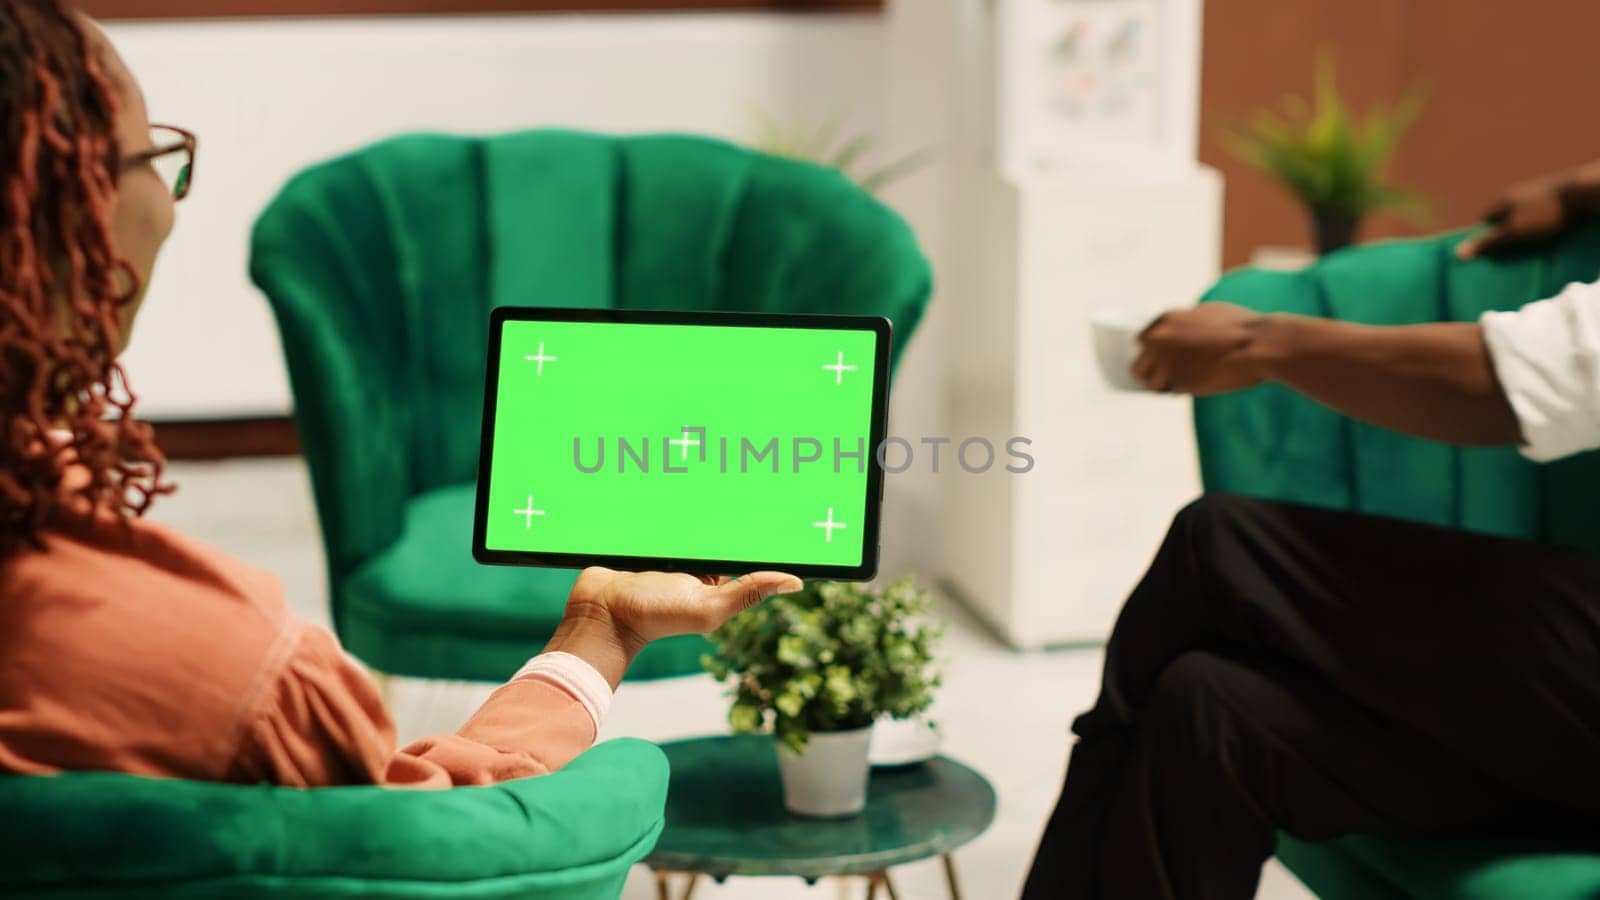 Tourists in hotel lobby being assisted by manager, holding chroma key green screen mock up tablet in landscape mode. Resort administrator helping guests during check in process